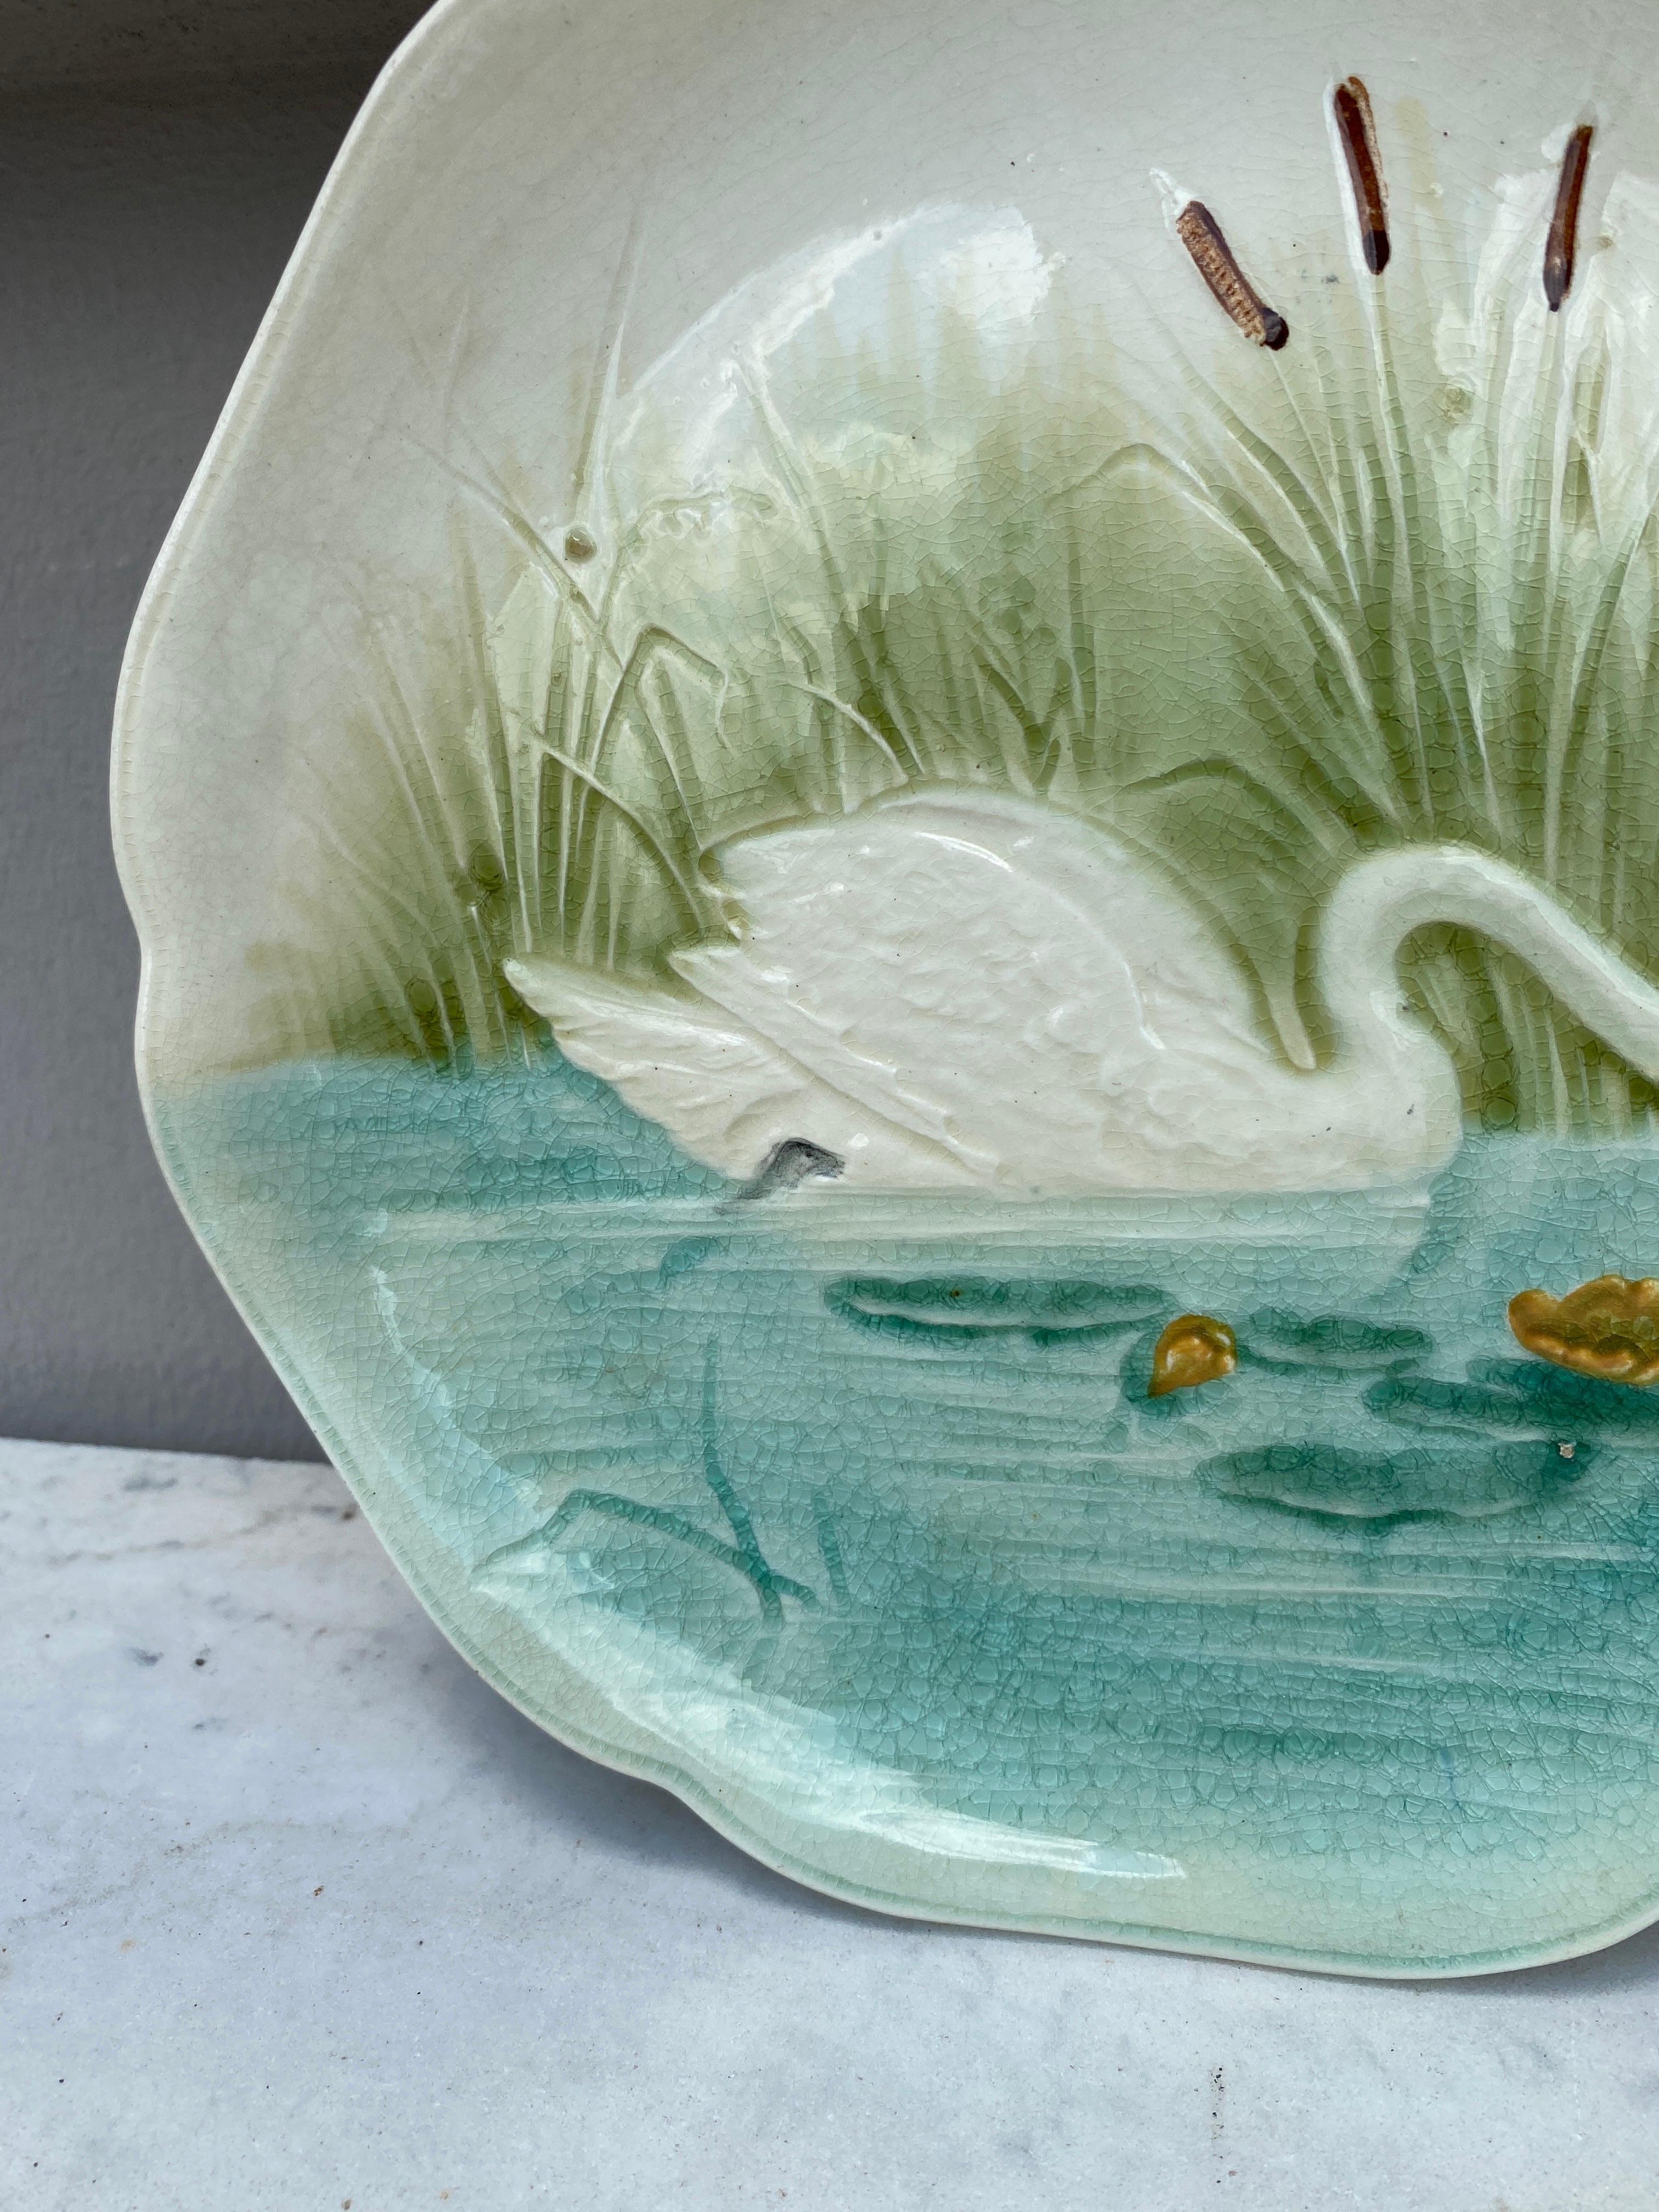 Majolica plate with a swan on a pond signed Hippolyte Boulenger Choisy le Roi, circa 1890.
The manufacture of Choisy le Roi was one of the most important manufacture at the end of 19th century, they produced very high quality ceramics of all kinds